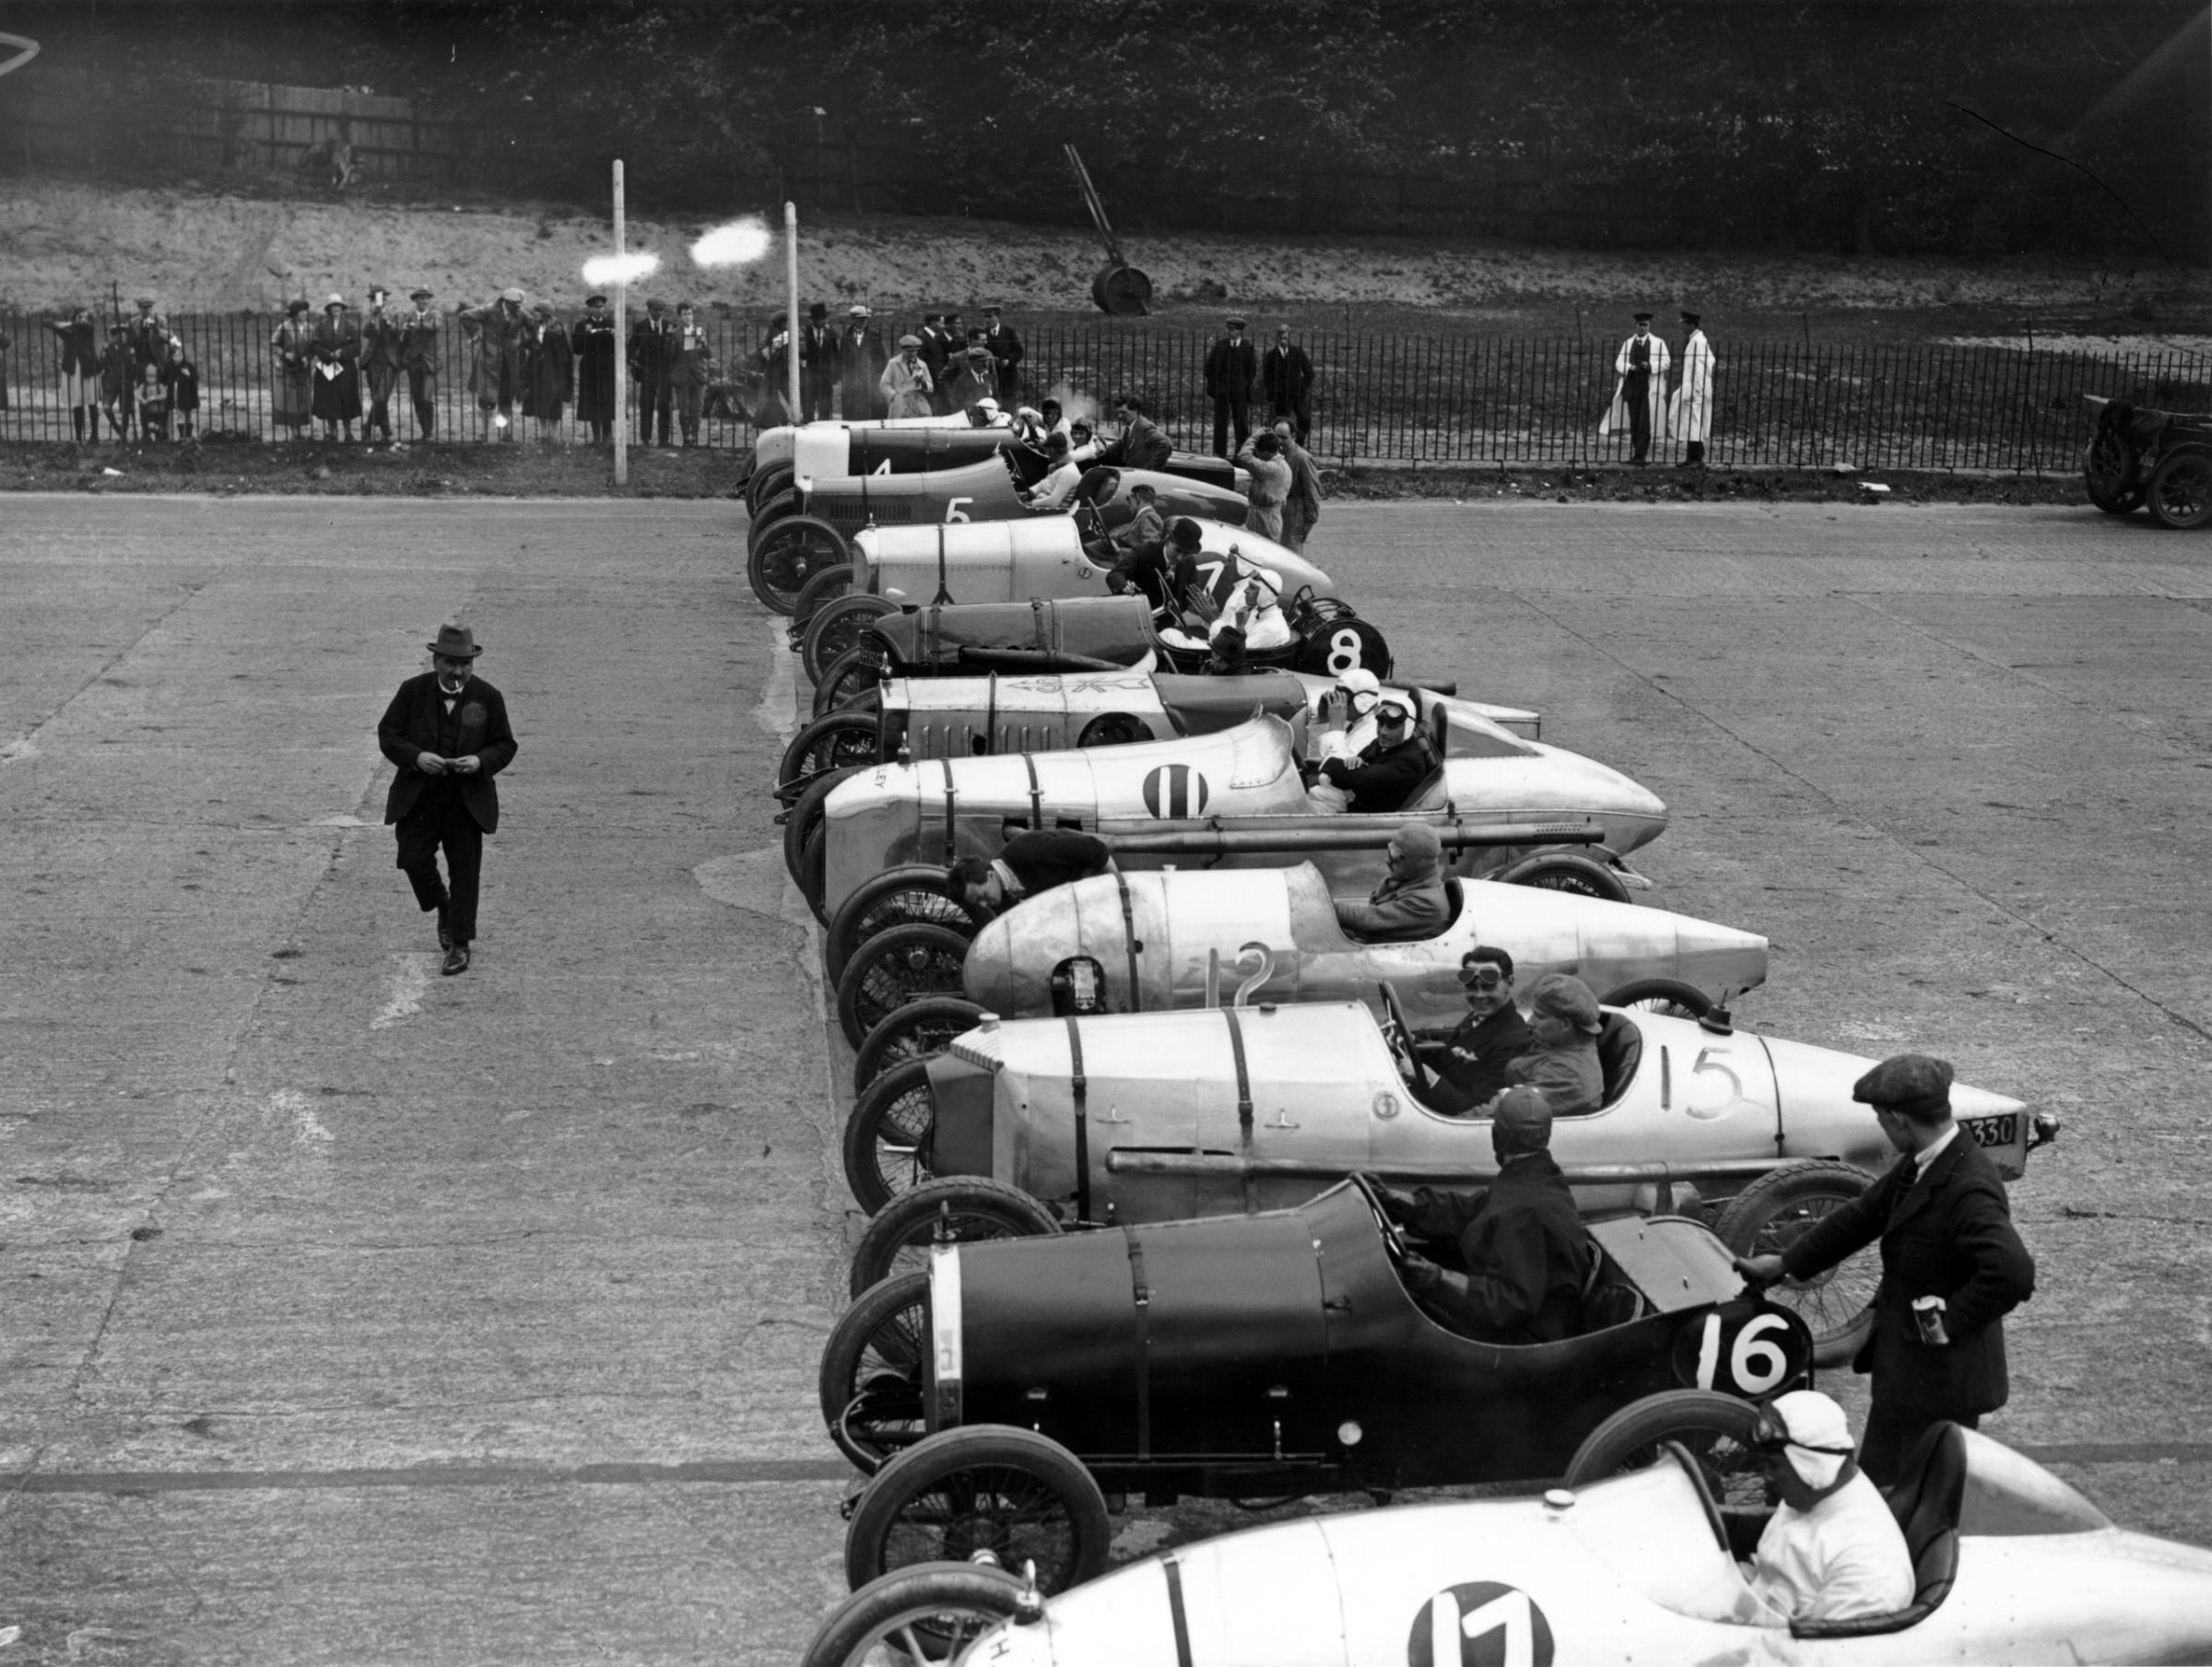 Cars lined up at the starting line for the 3-lap 100 mph Long Handicap race at the Brooklands Whitsun meeting.